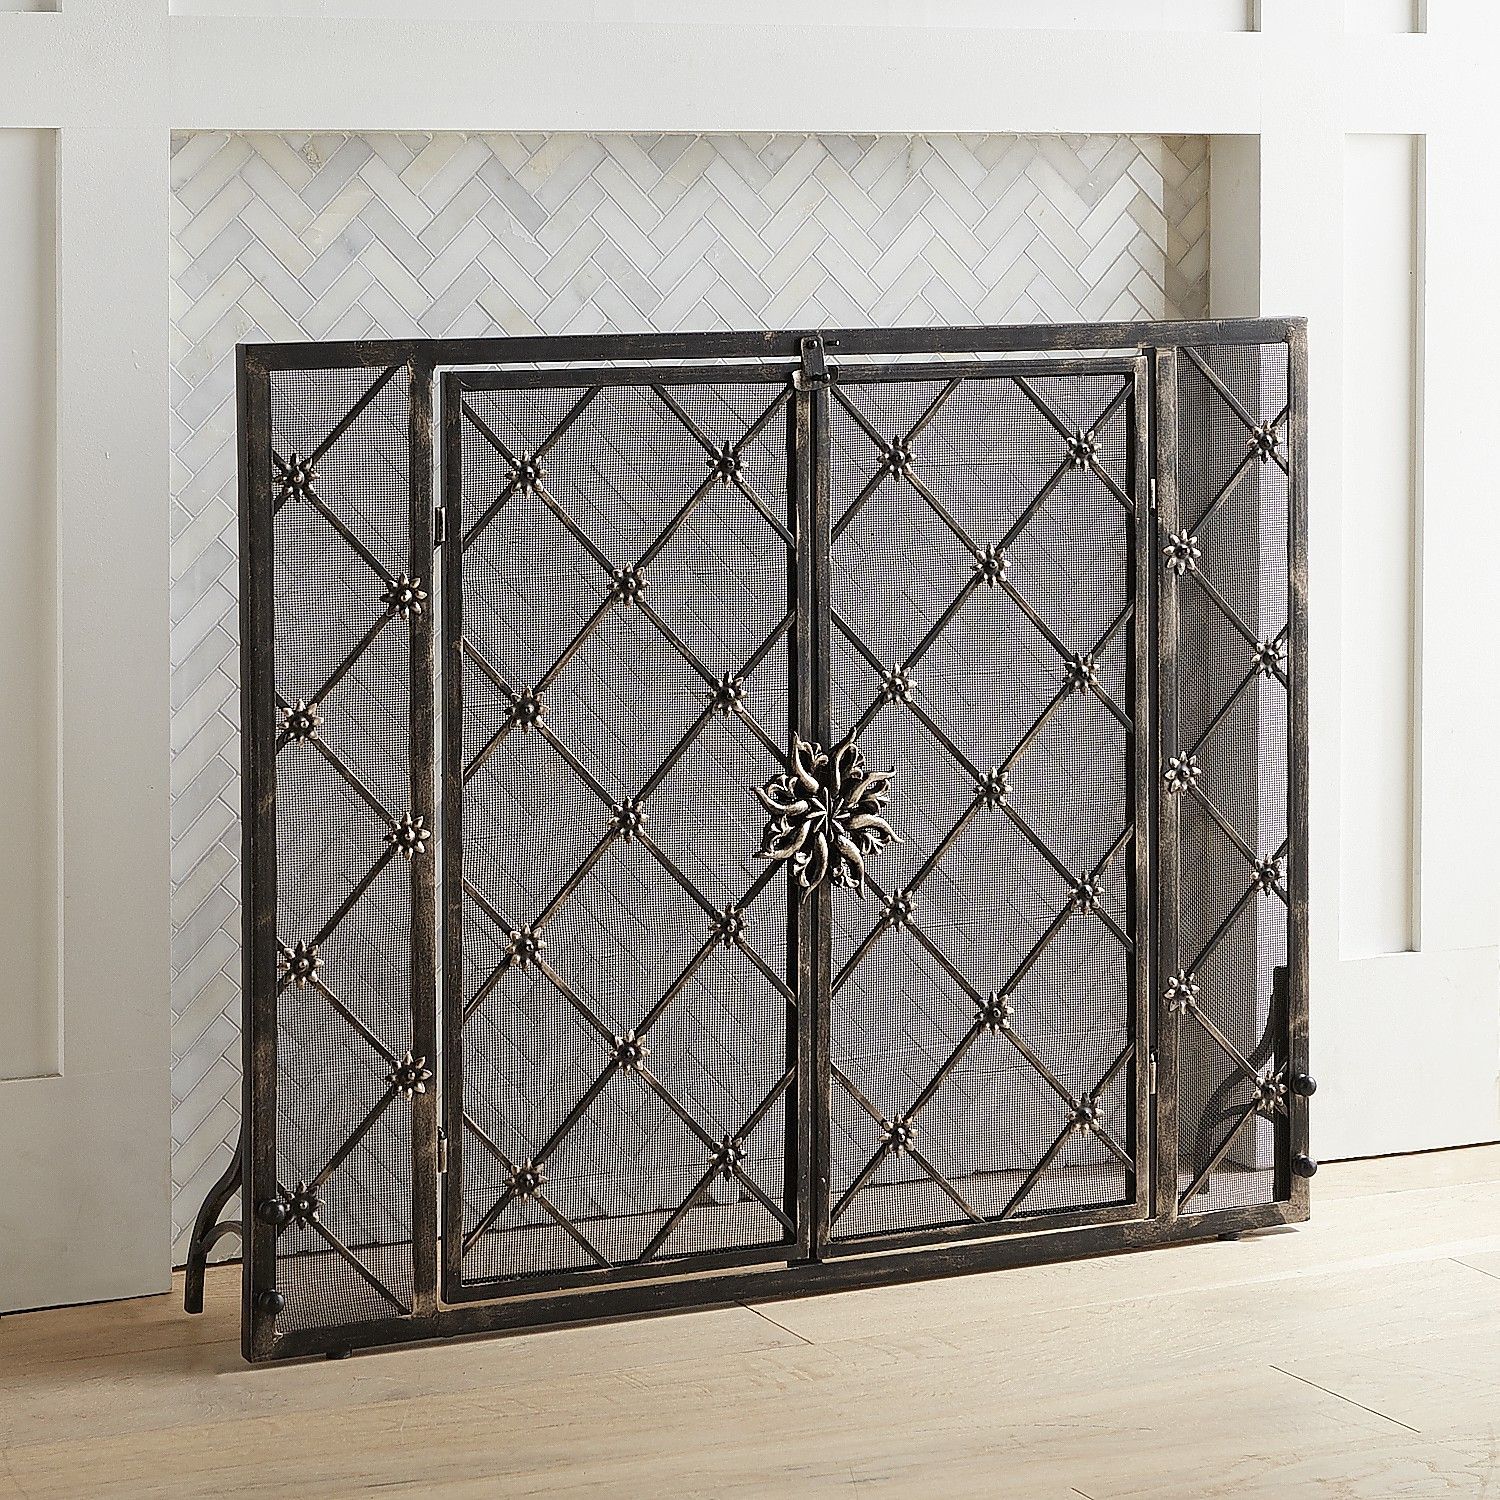 Ams Fireplace Awesome Junction Fireplace Screen In 2019 Products